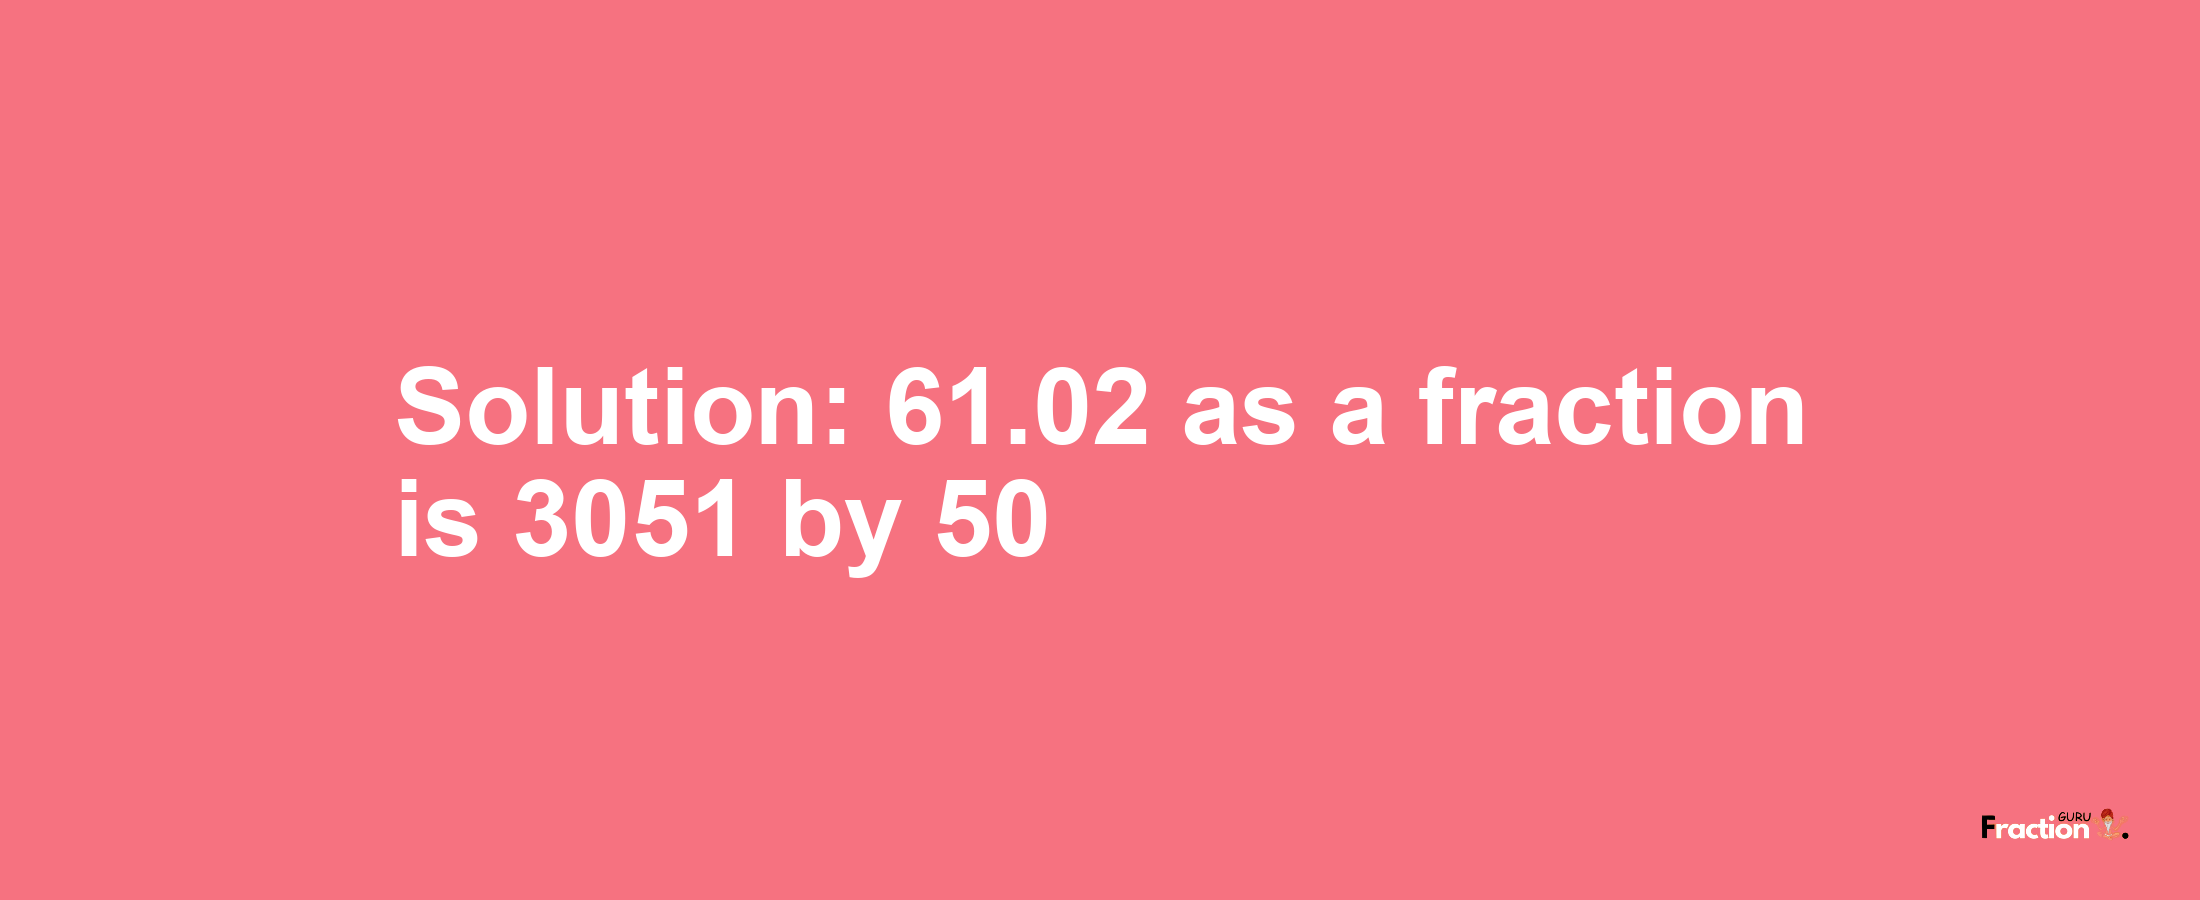 Solution:61.02 as a fraction is 3051/50